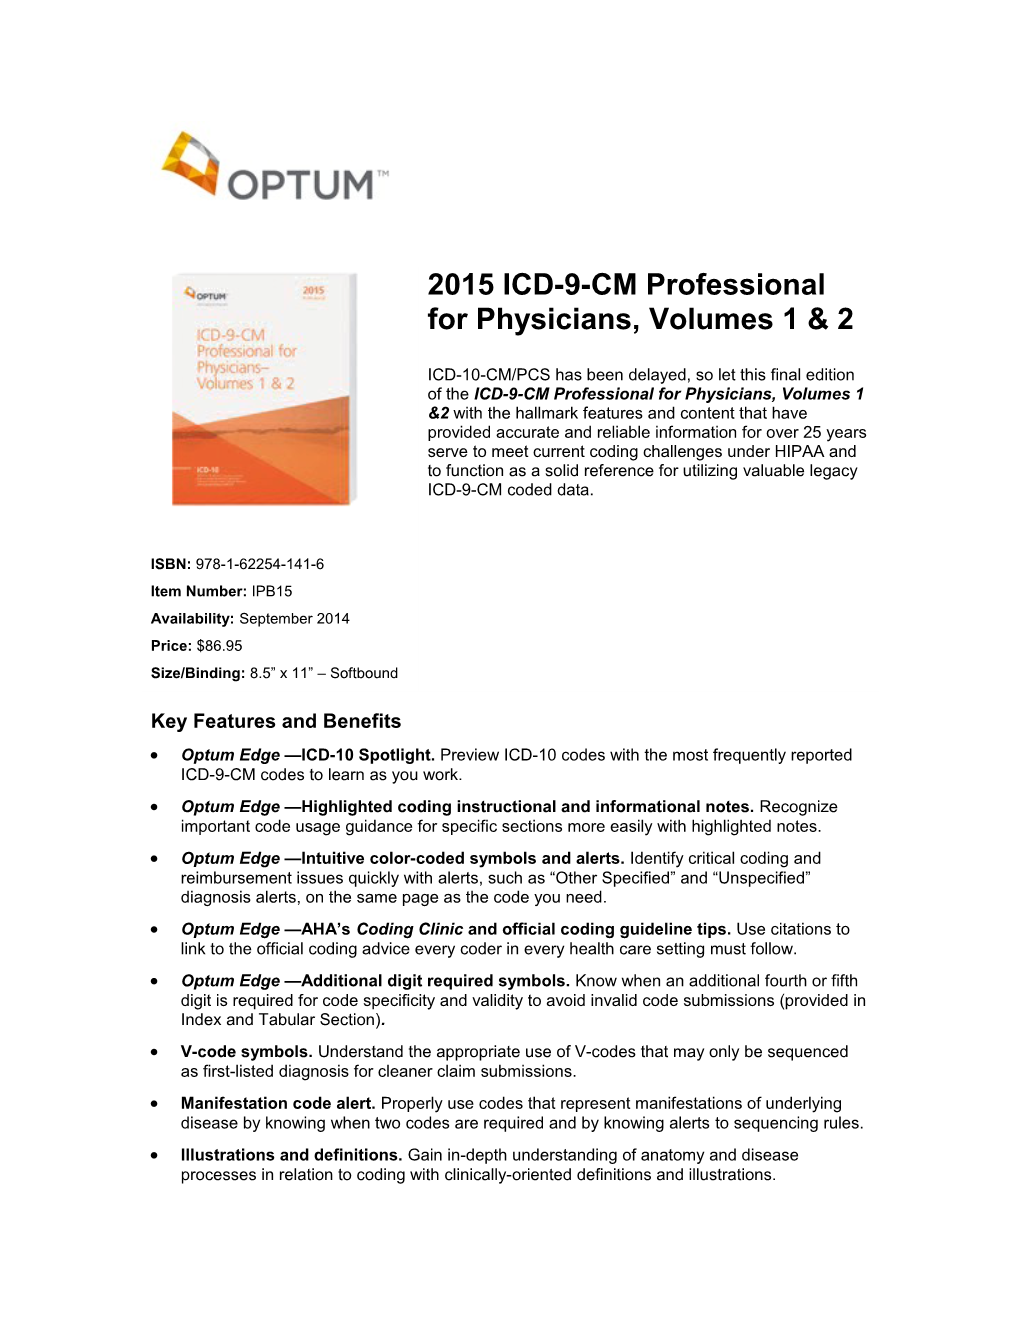 Optum Edge ICD-10 Spotlight. Preview ICD-10 Codes with the Most Frequently Reported ICD-9-CM